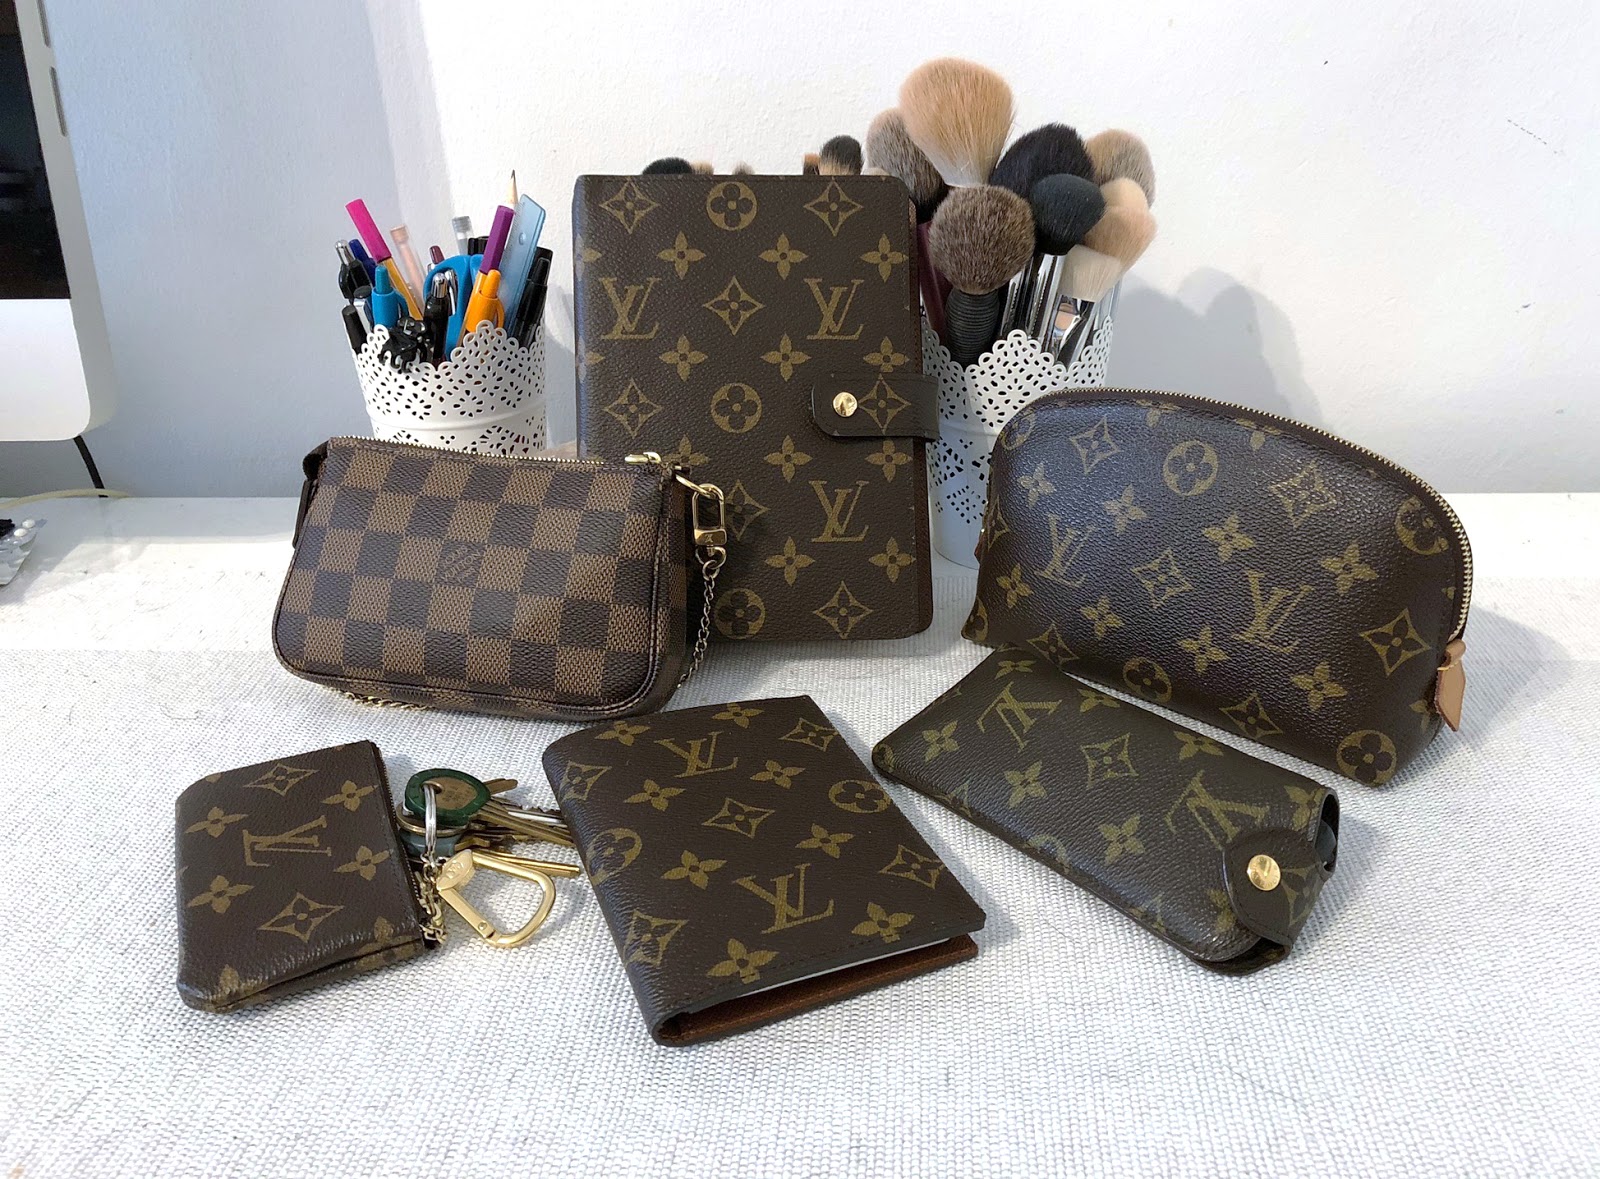 Louis Vuitton small leather goods  Louis vuitton purse, Louis vuitton bag, Louis  vuitton handbags